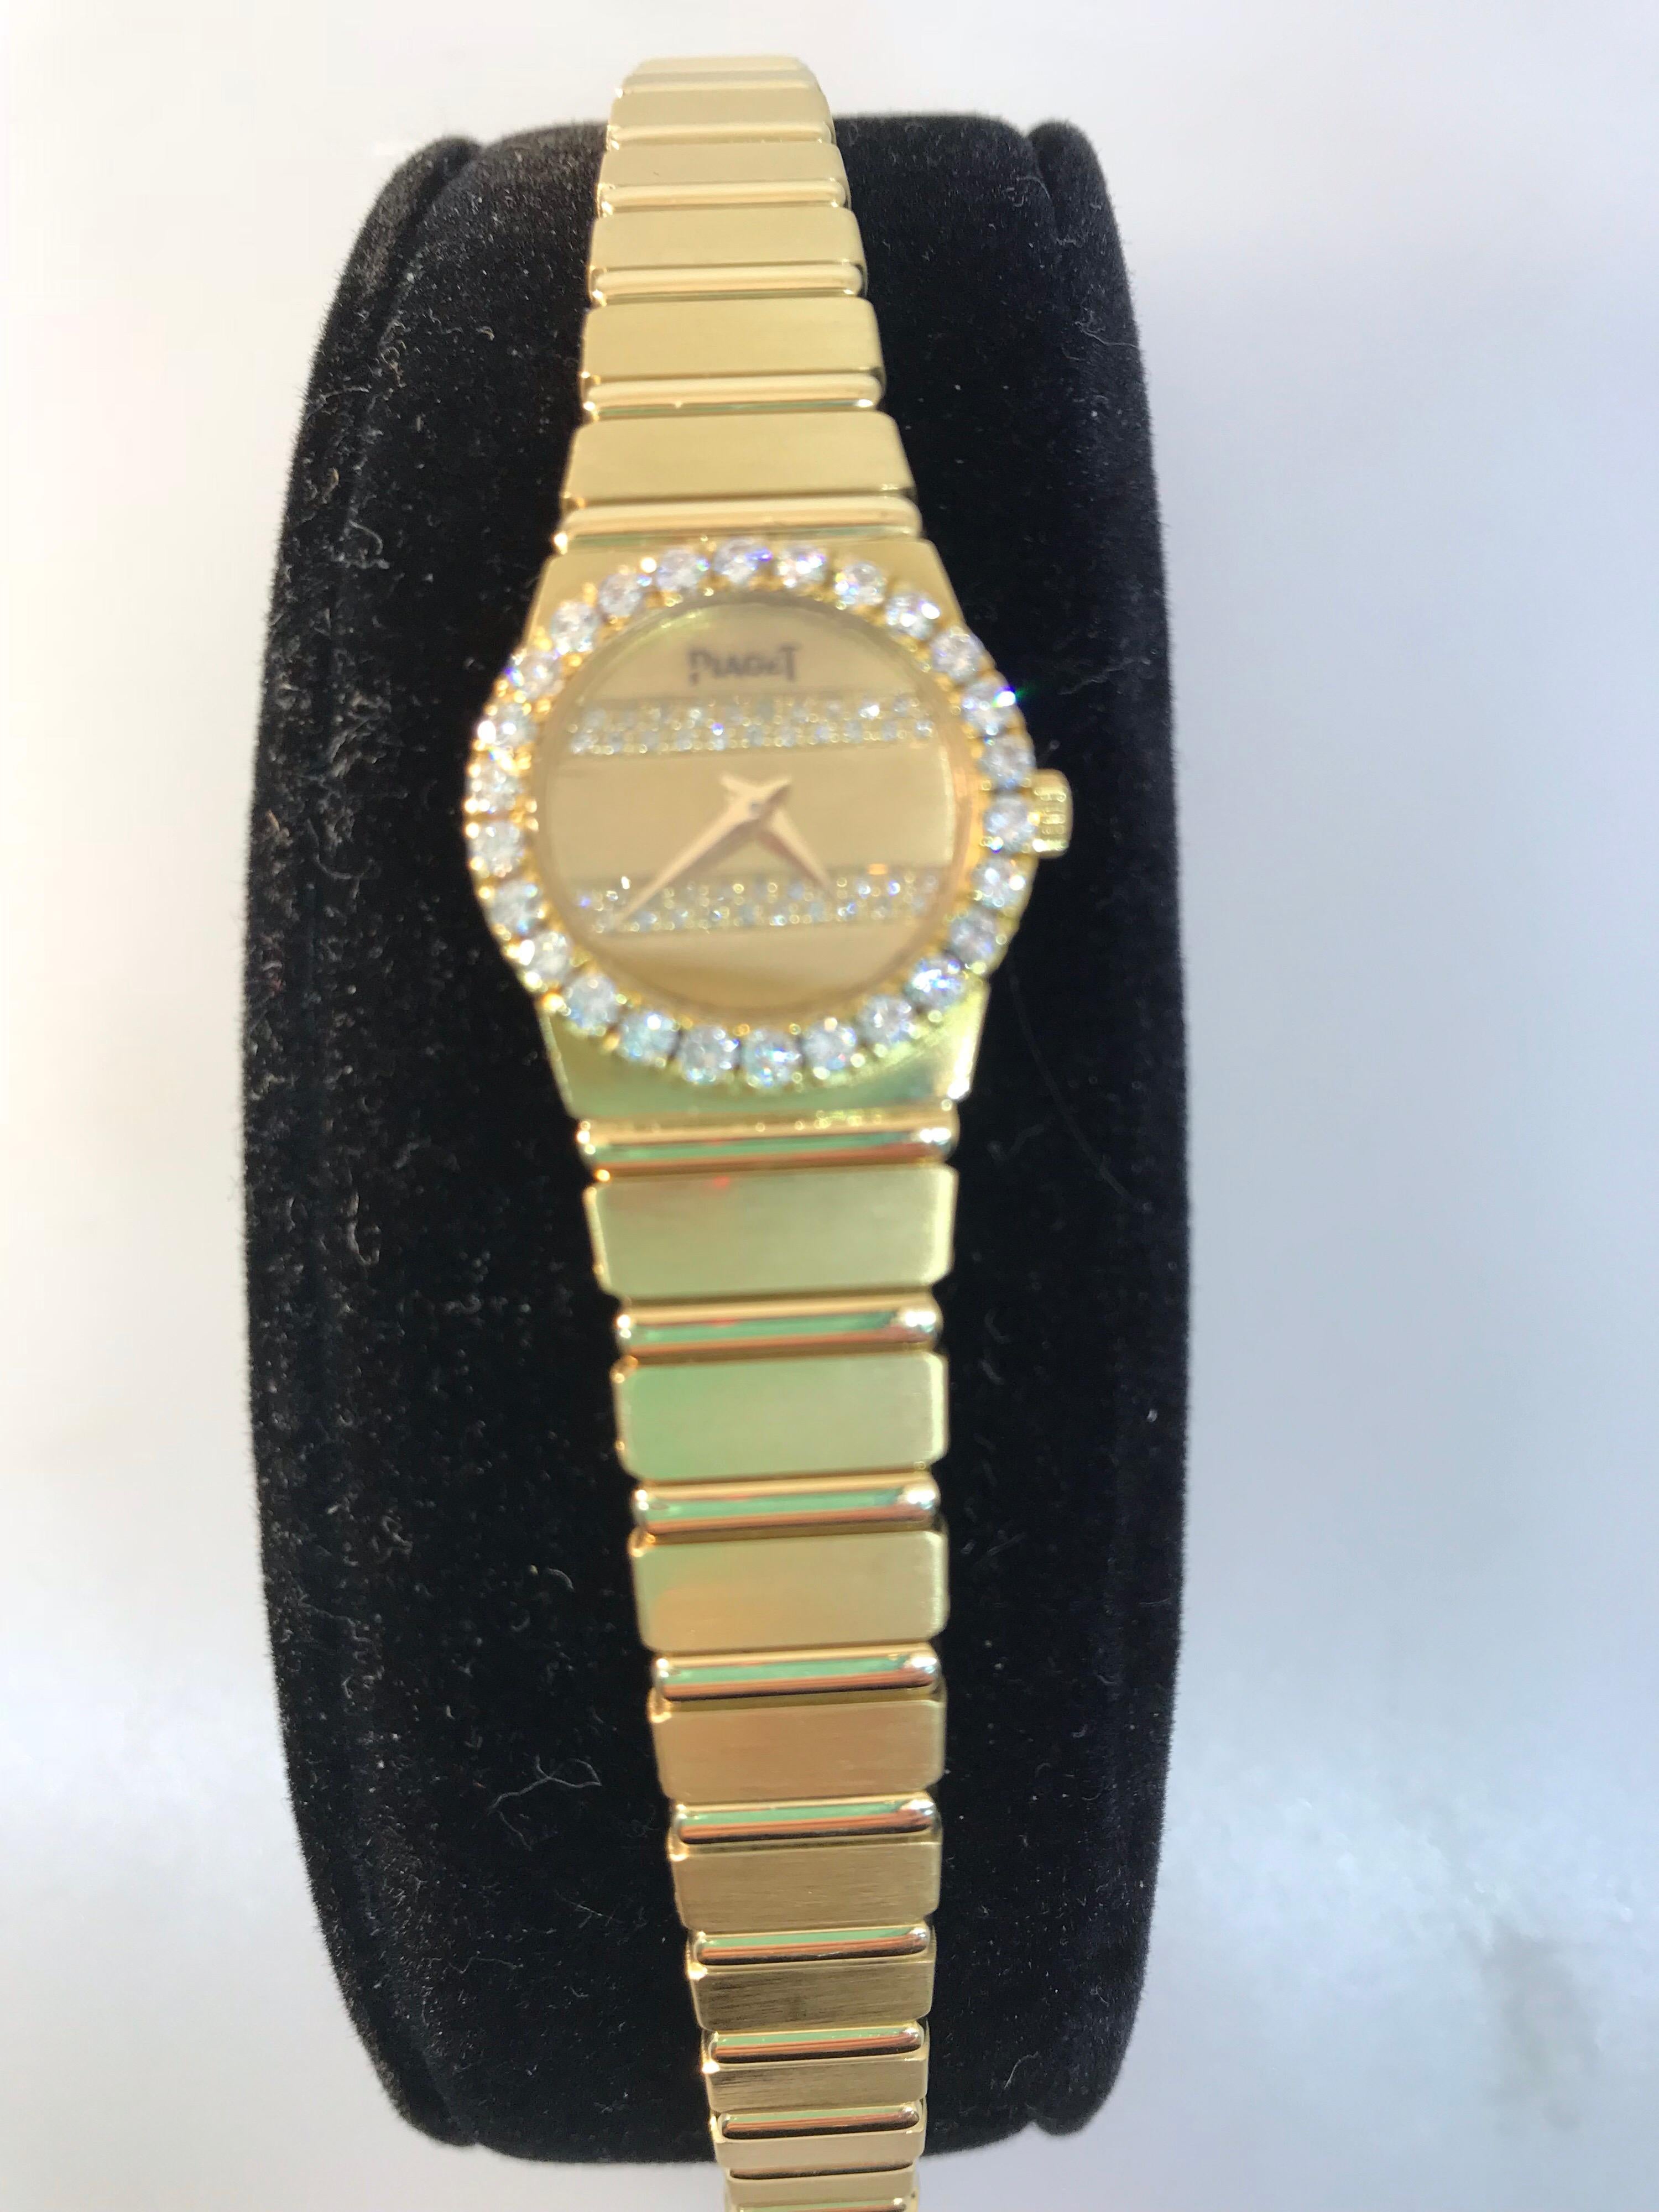 Piaget Polo Ladies Watch

Model Number: 8296

100% Authentic

Preowned in Excellent Condition

Comes with a generic watch box

18 Karat Yellow Gold Case & Bracelet

Factory Diamond Bezel

Gold Dial set with factory diamonds

Gold Tone Hour